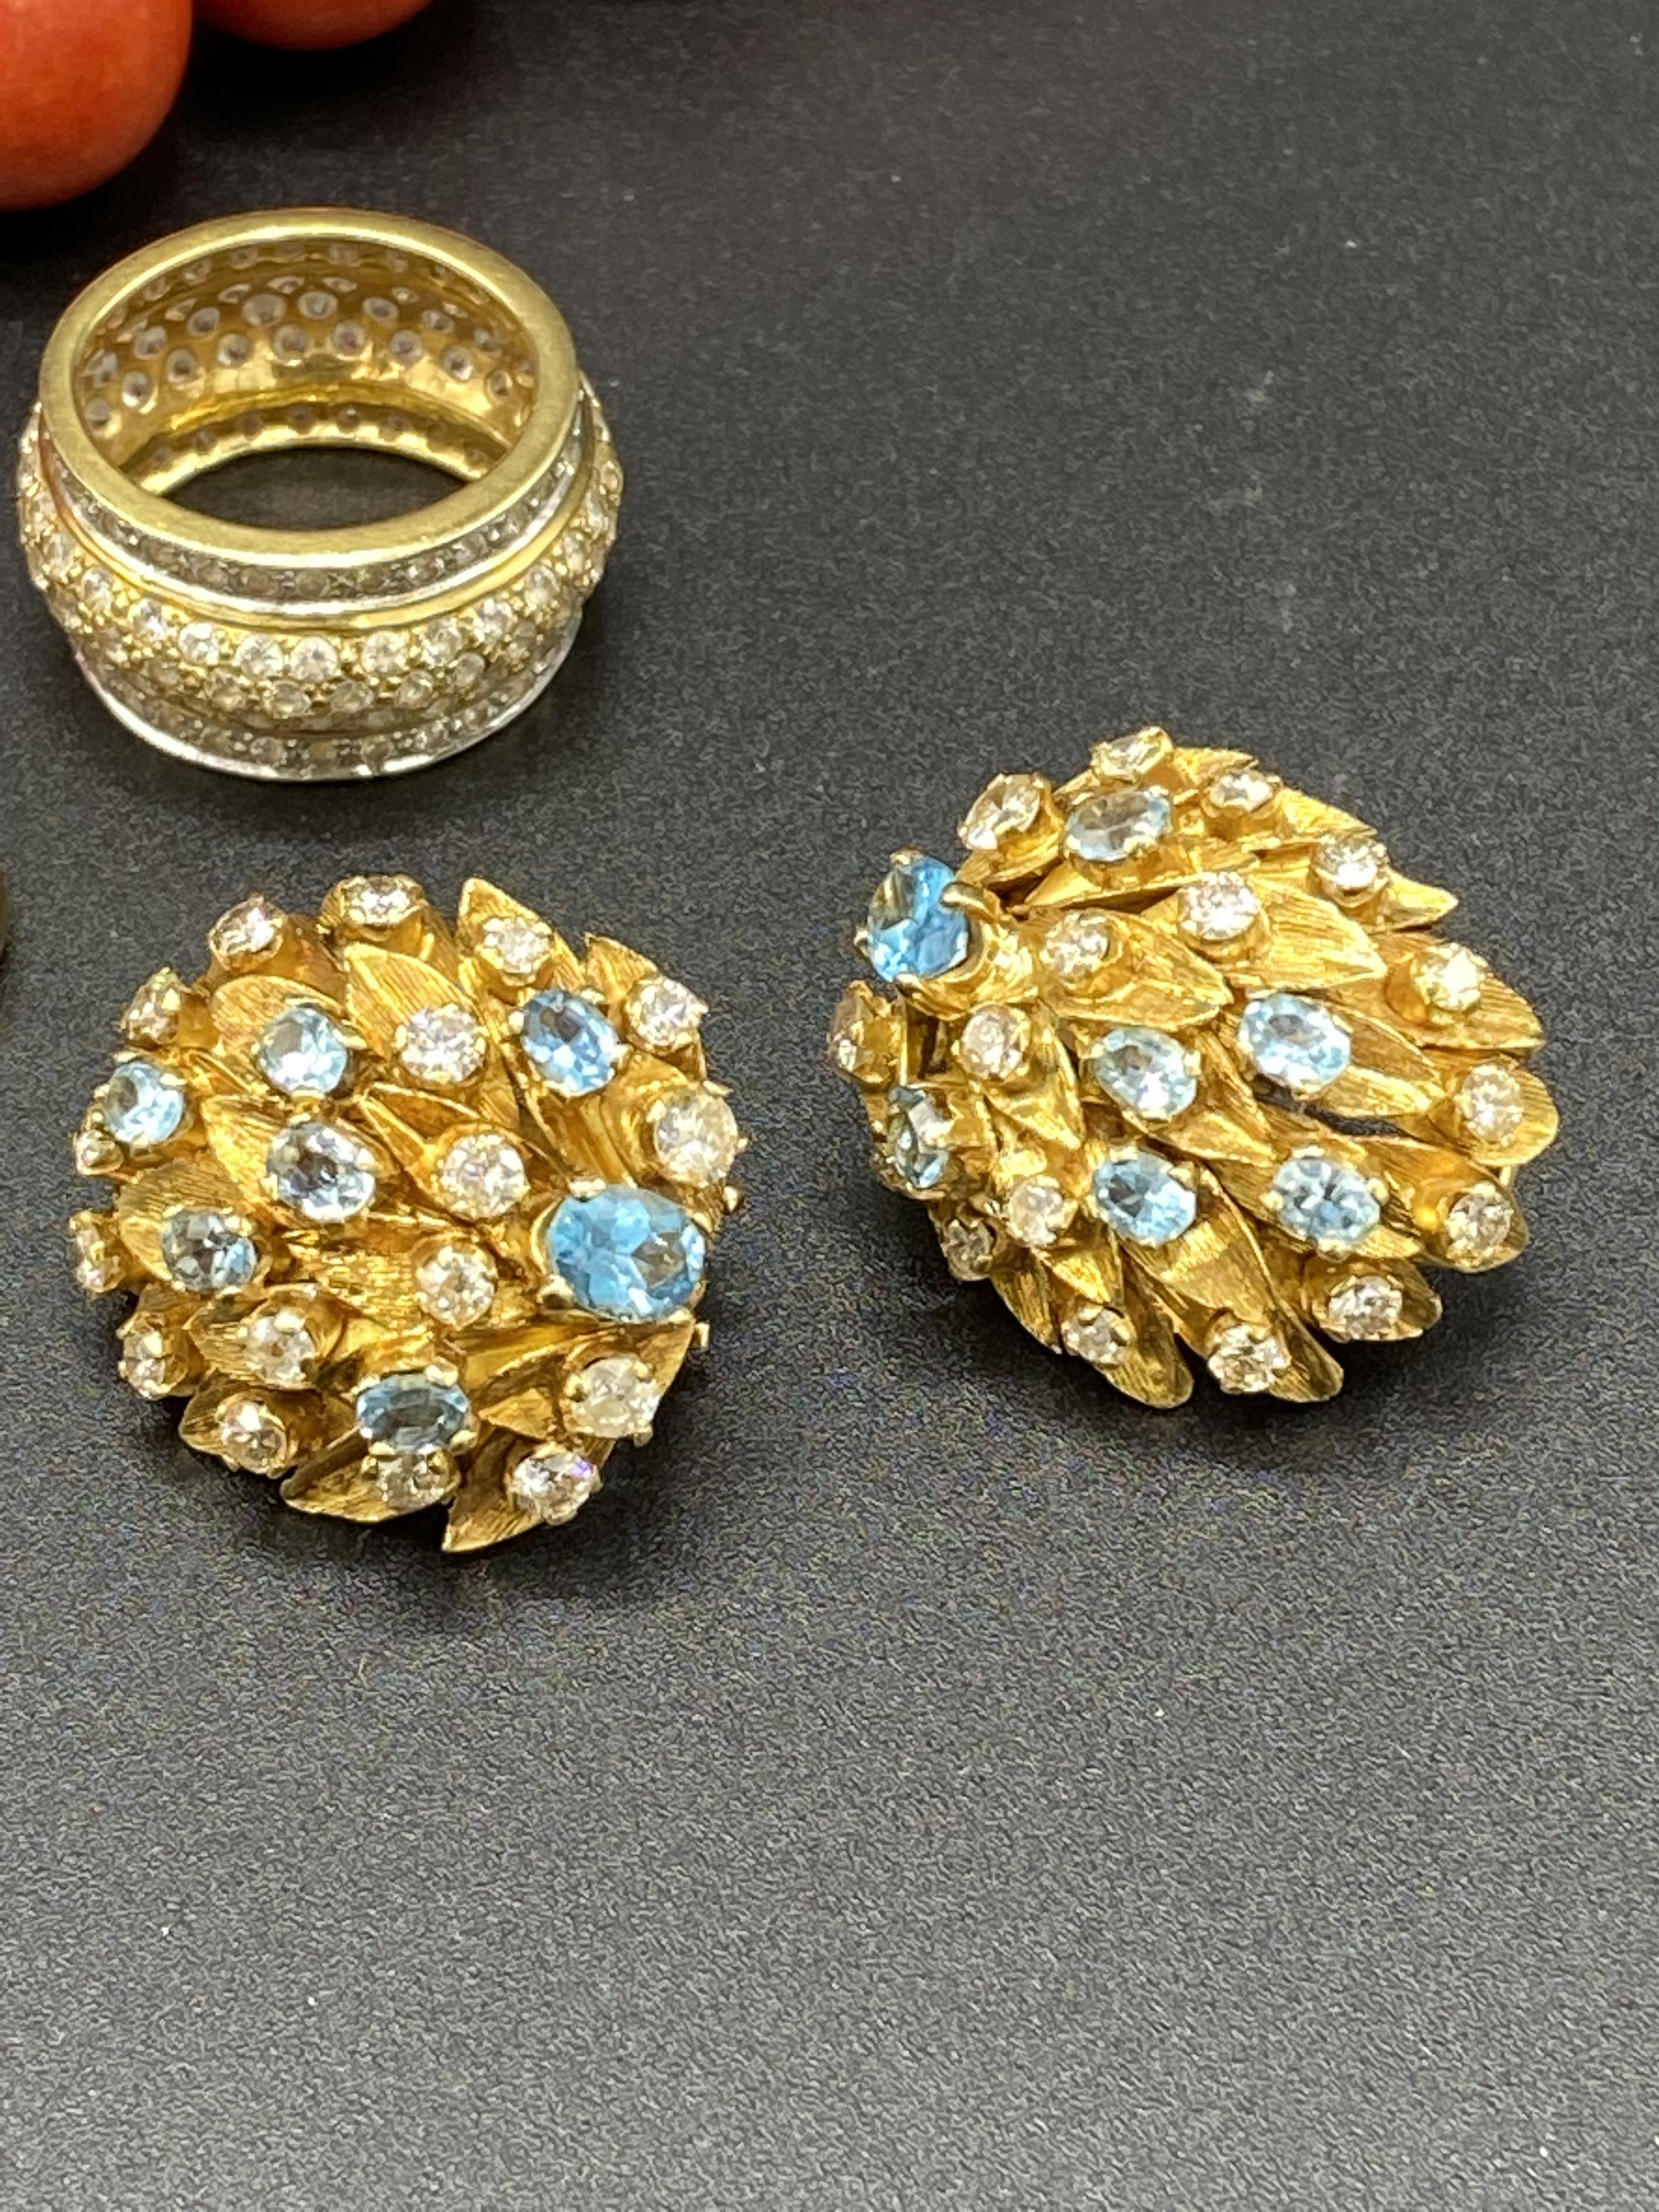 Pair of yellow metal earring set with diamonds and aquamarines, together with costume jewellery - Image 2 of 6